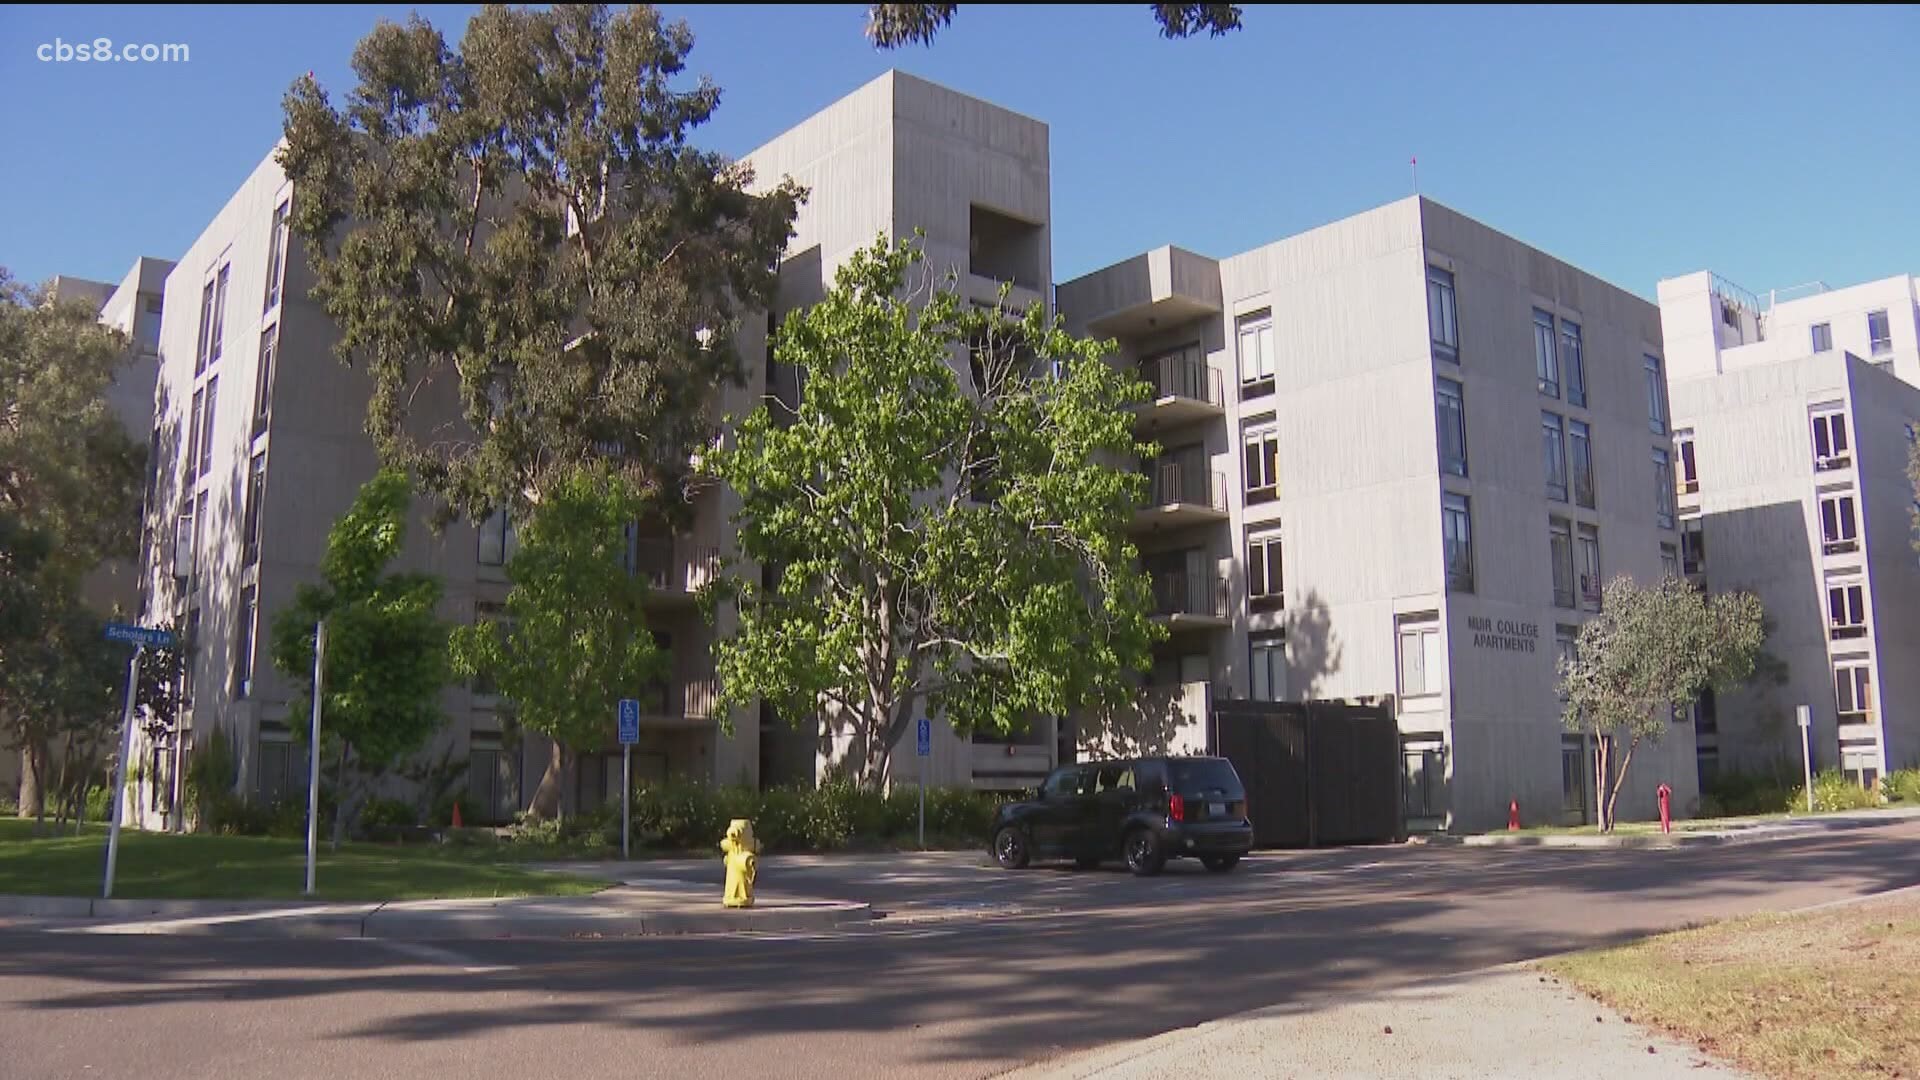 UCSD's housing department says they have to increase rents after already accumulating nearly $30 million in debt.